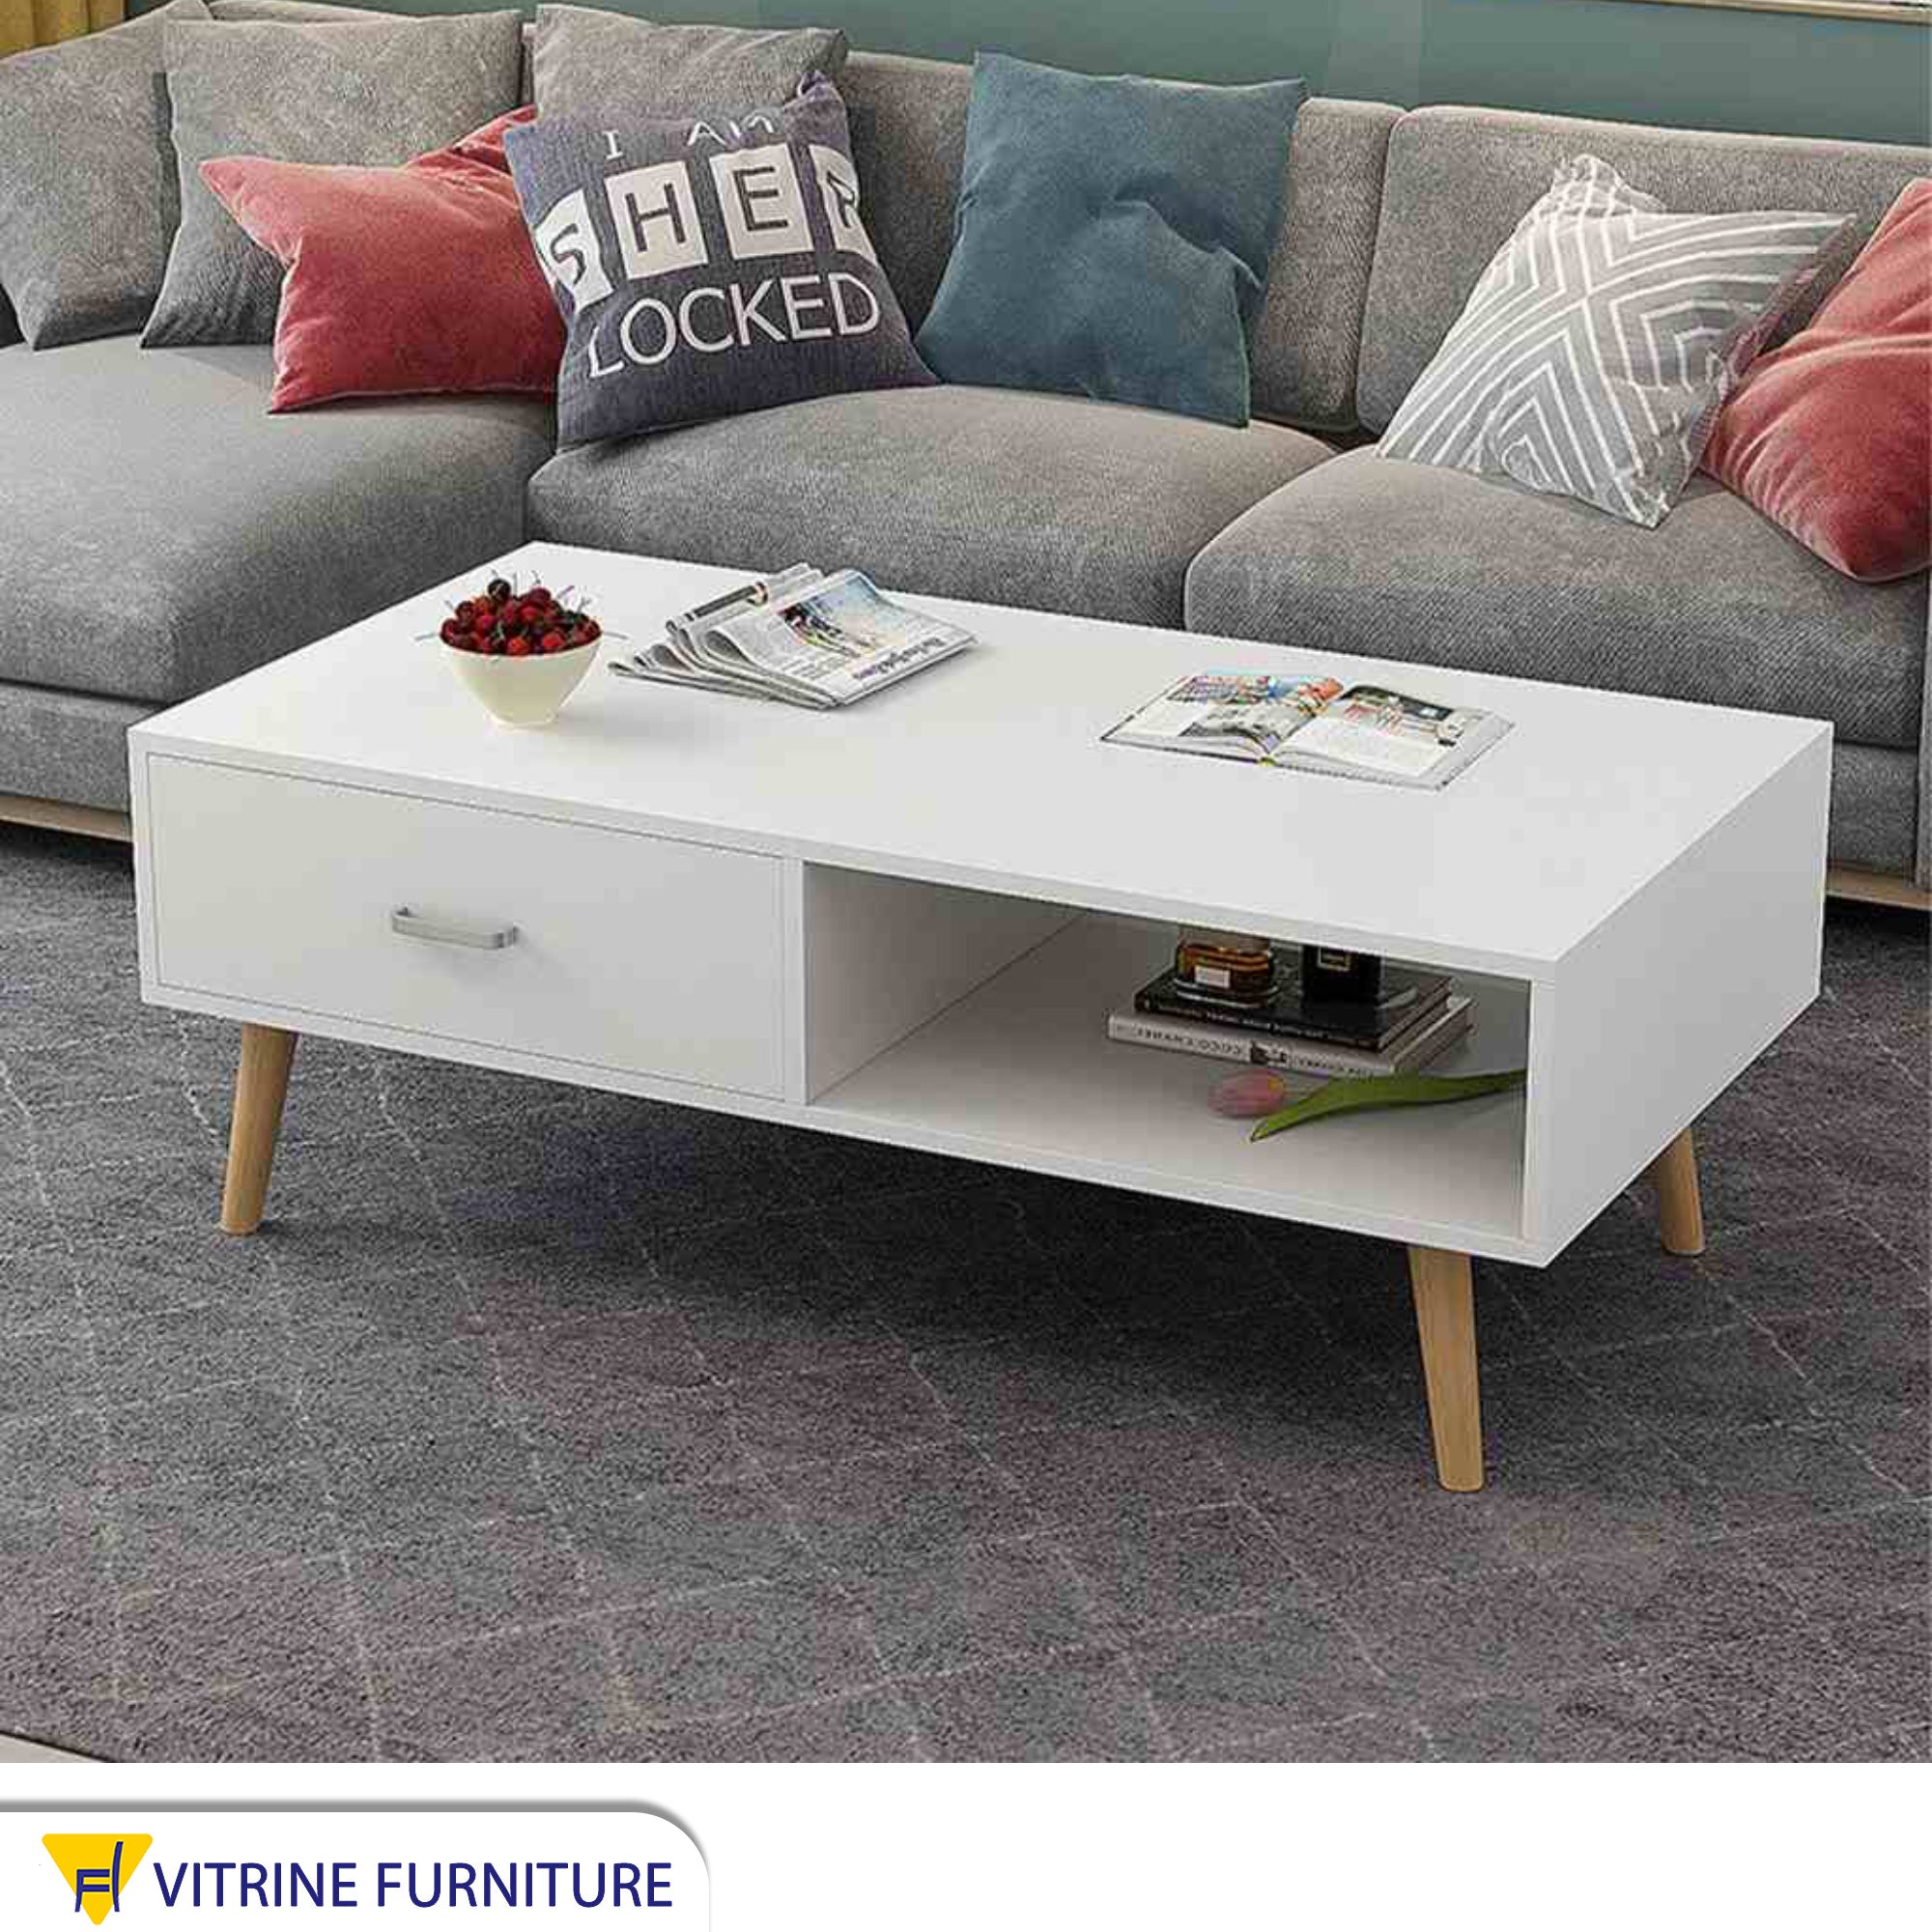 Coffee table with drawer and open space